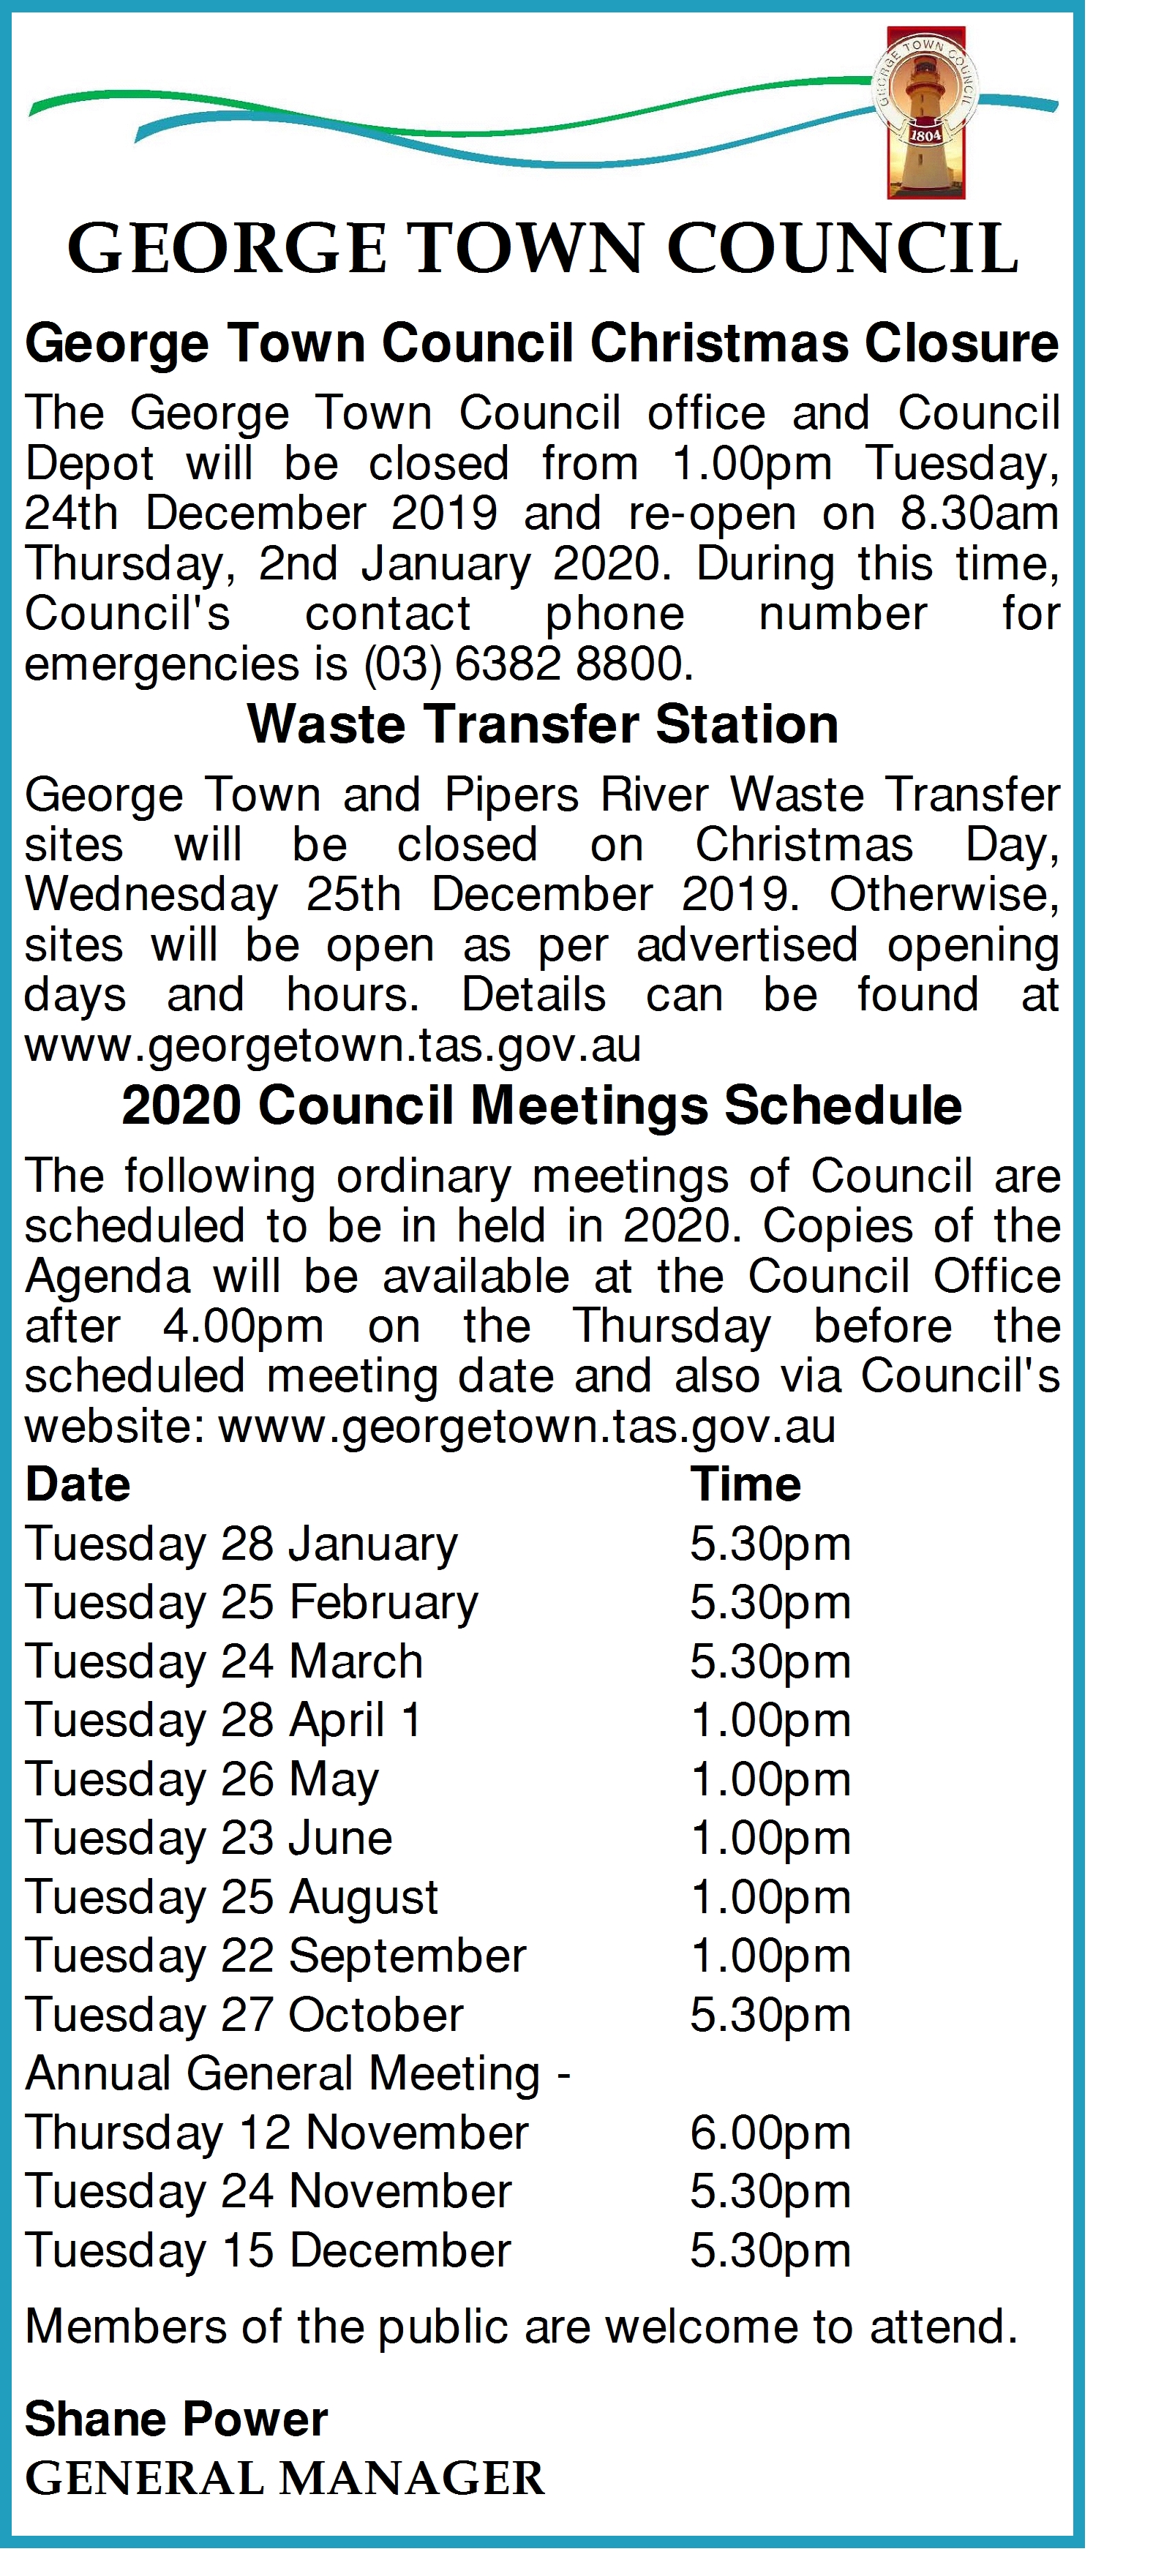 Council Meeting Schedule 2020